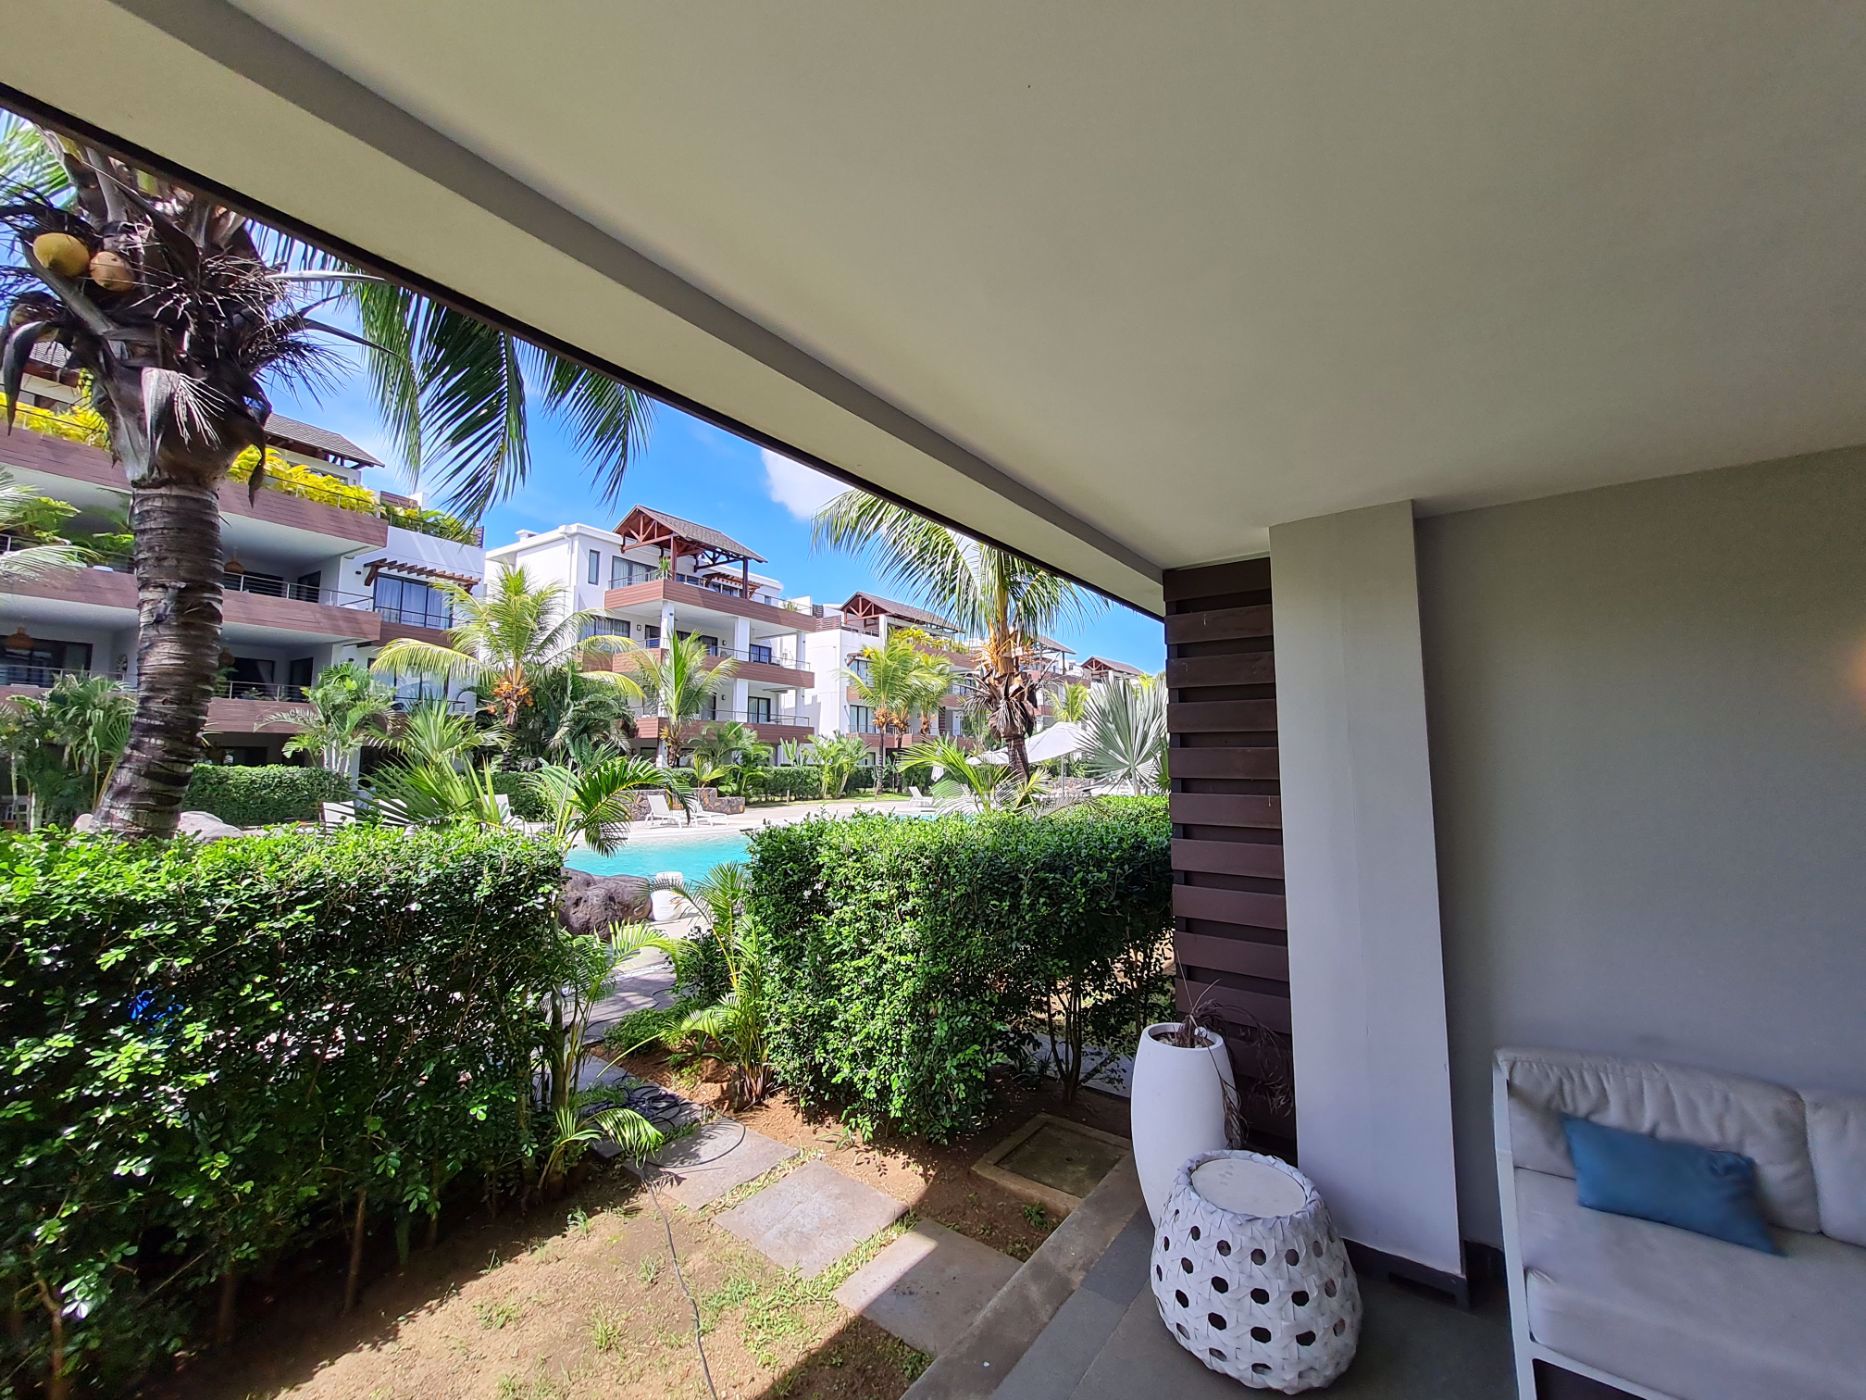 2 bedroom apartment for sale in Mon Choisy (Mauritius)